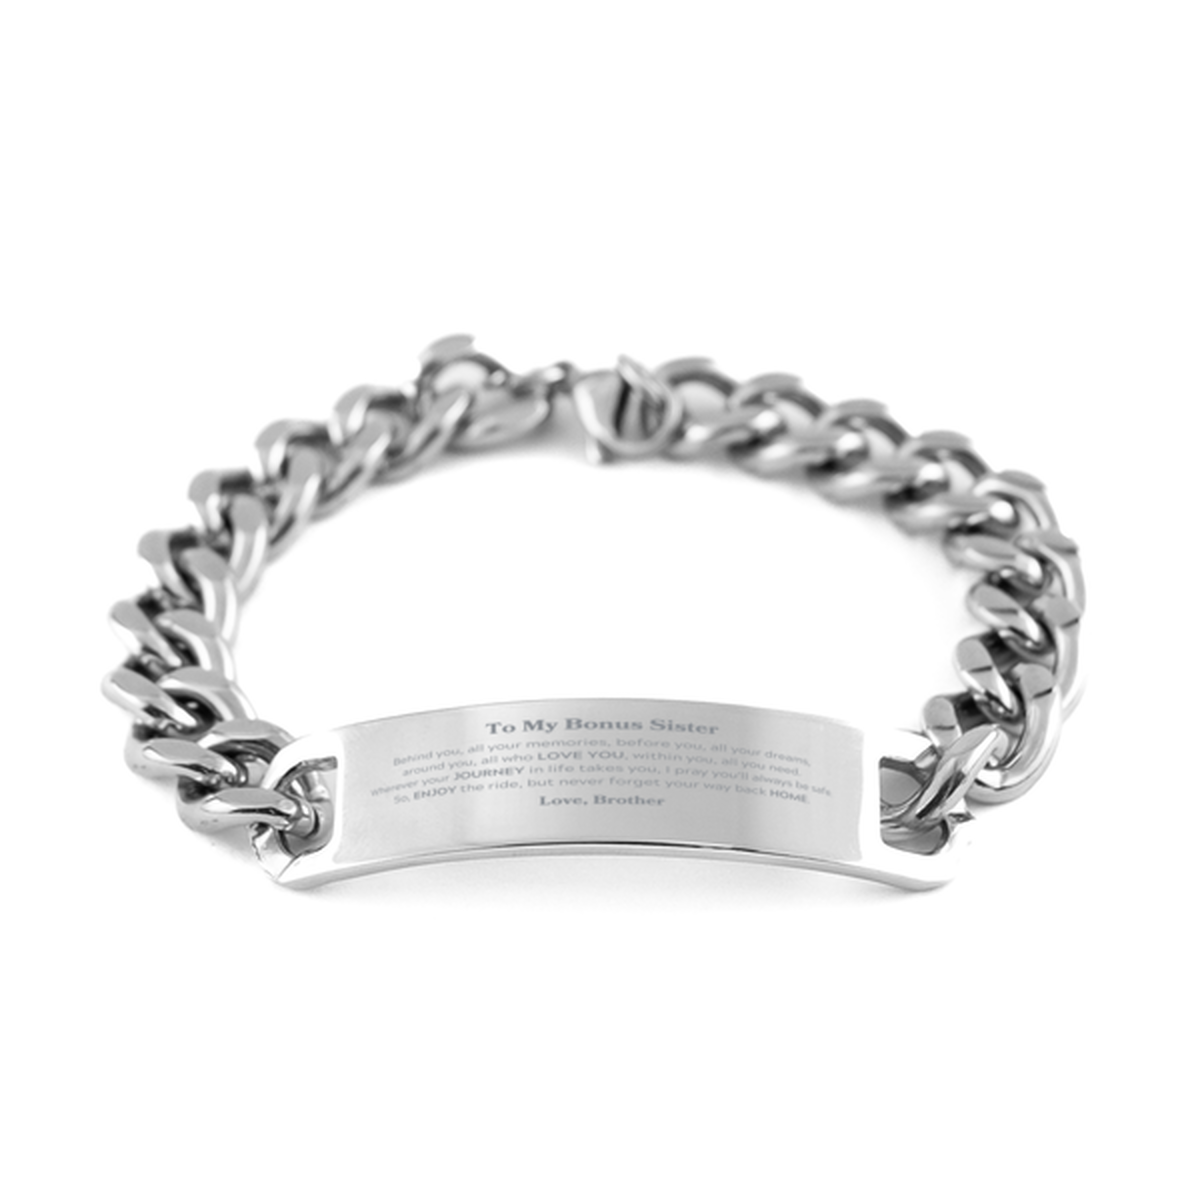 To My Bonus Sister Graduation Gifts from Brother, Bonus Sister Cuban Chain Stainless Steel Bracelet Christmas Birthday Gifts for Bonus Sister Behind you, all your memories, before you, all your dreams. Love, Brother